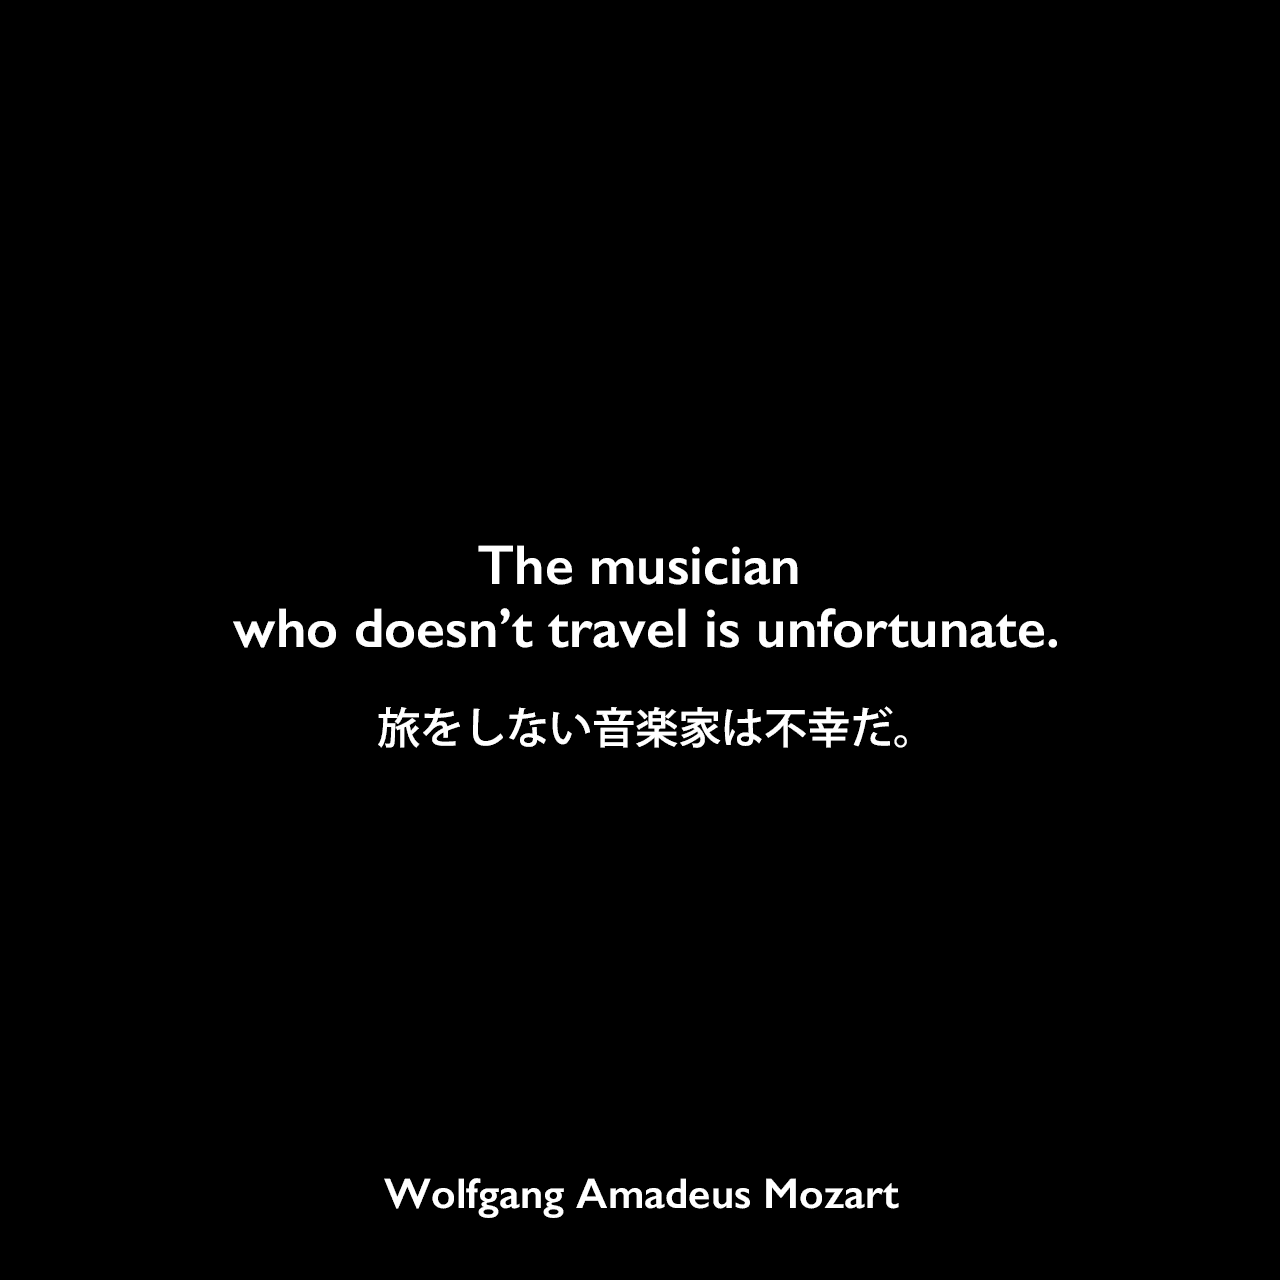 The musician who doesn’t travel is unfortunate.旅をしない音楽家は不幸だ。Wolfgang Amadeus Mozart